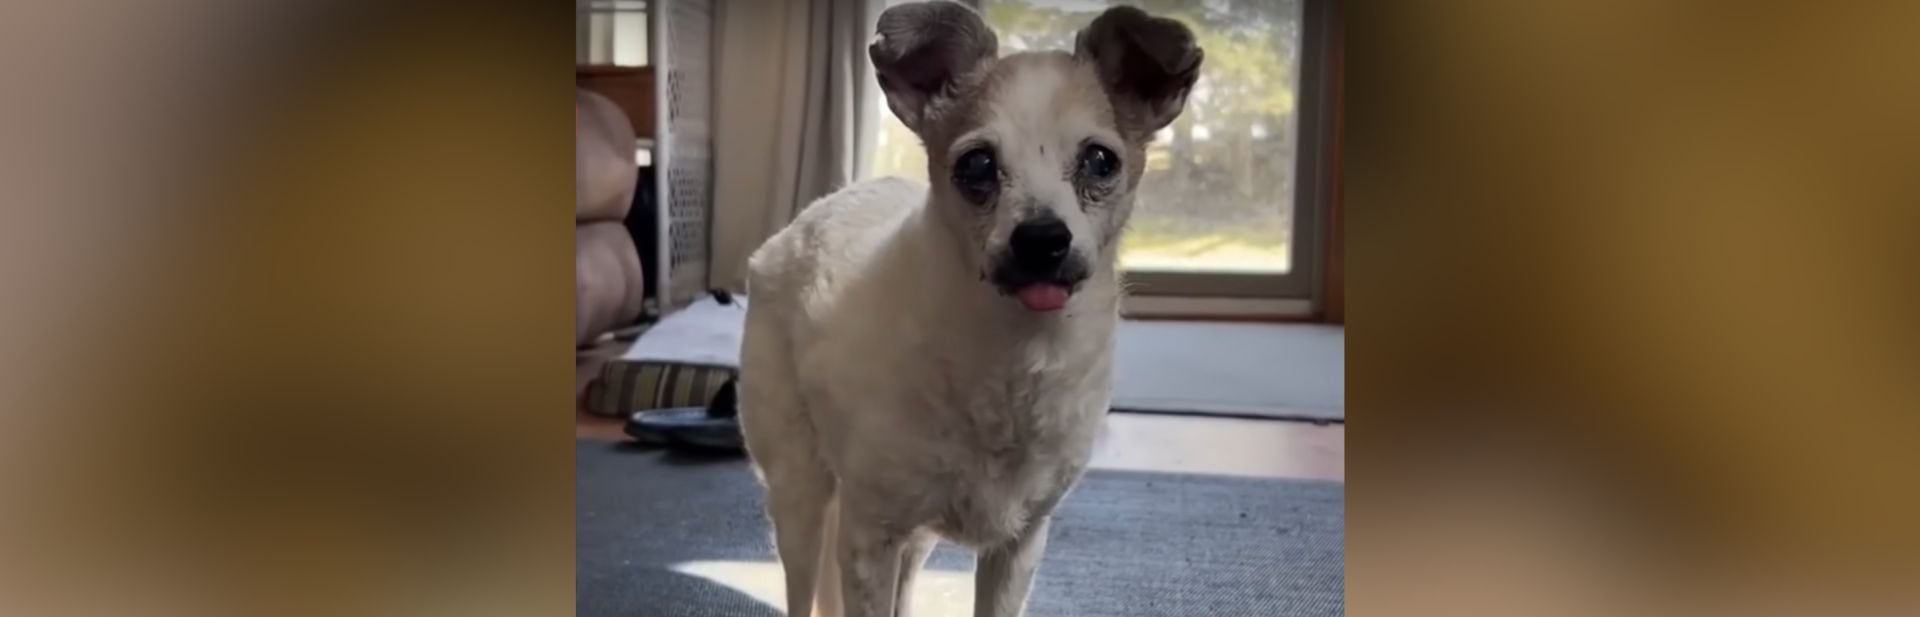 Chihuahua With Greyhound Legs Is Exactly As Weird As Imagined